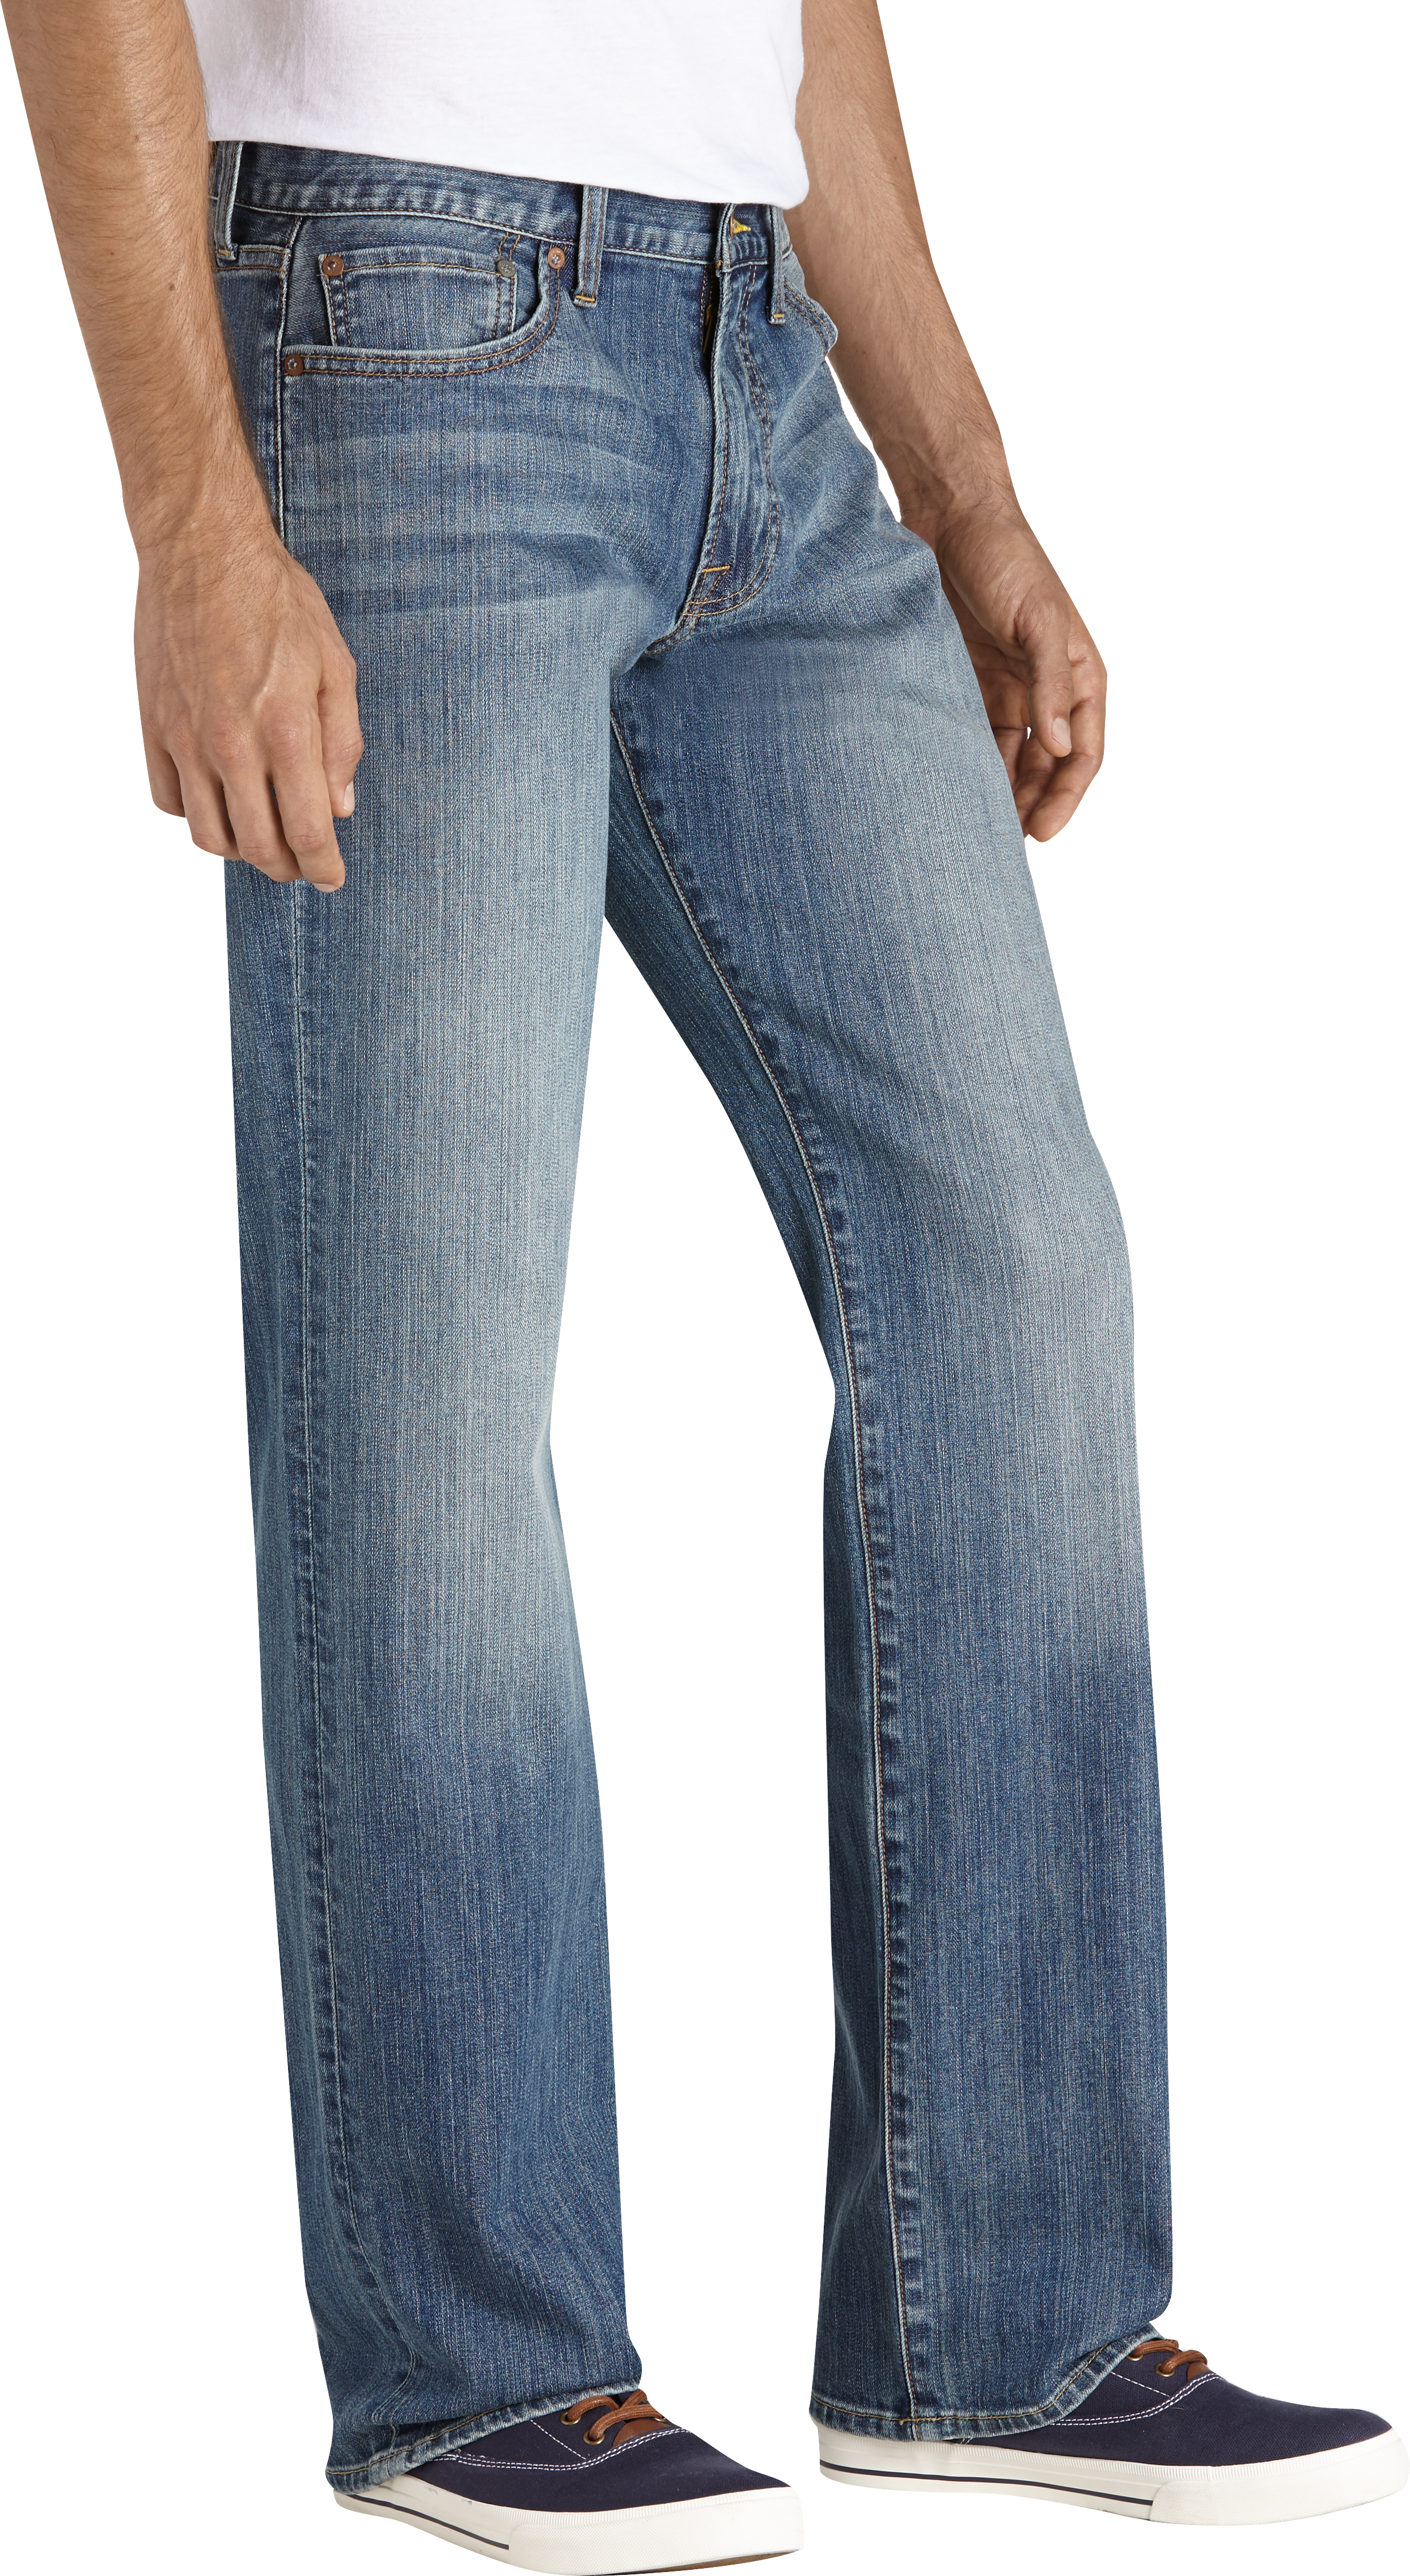 lucky brand jeans mens